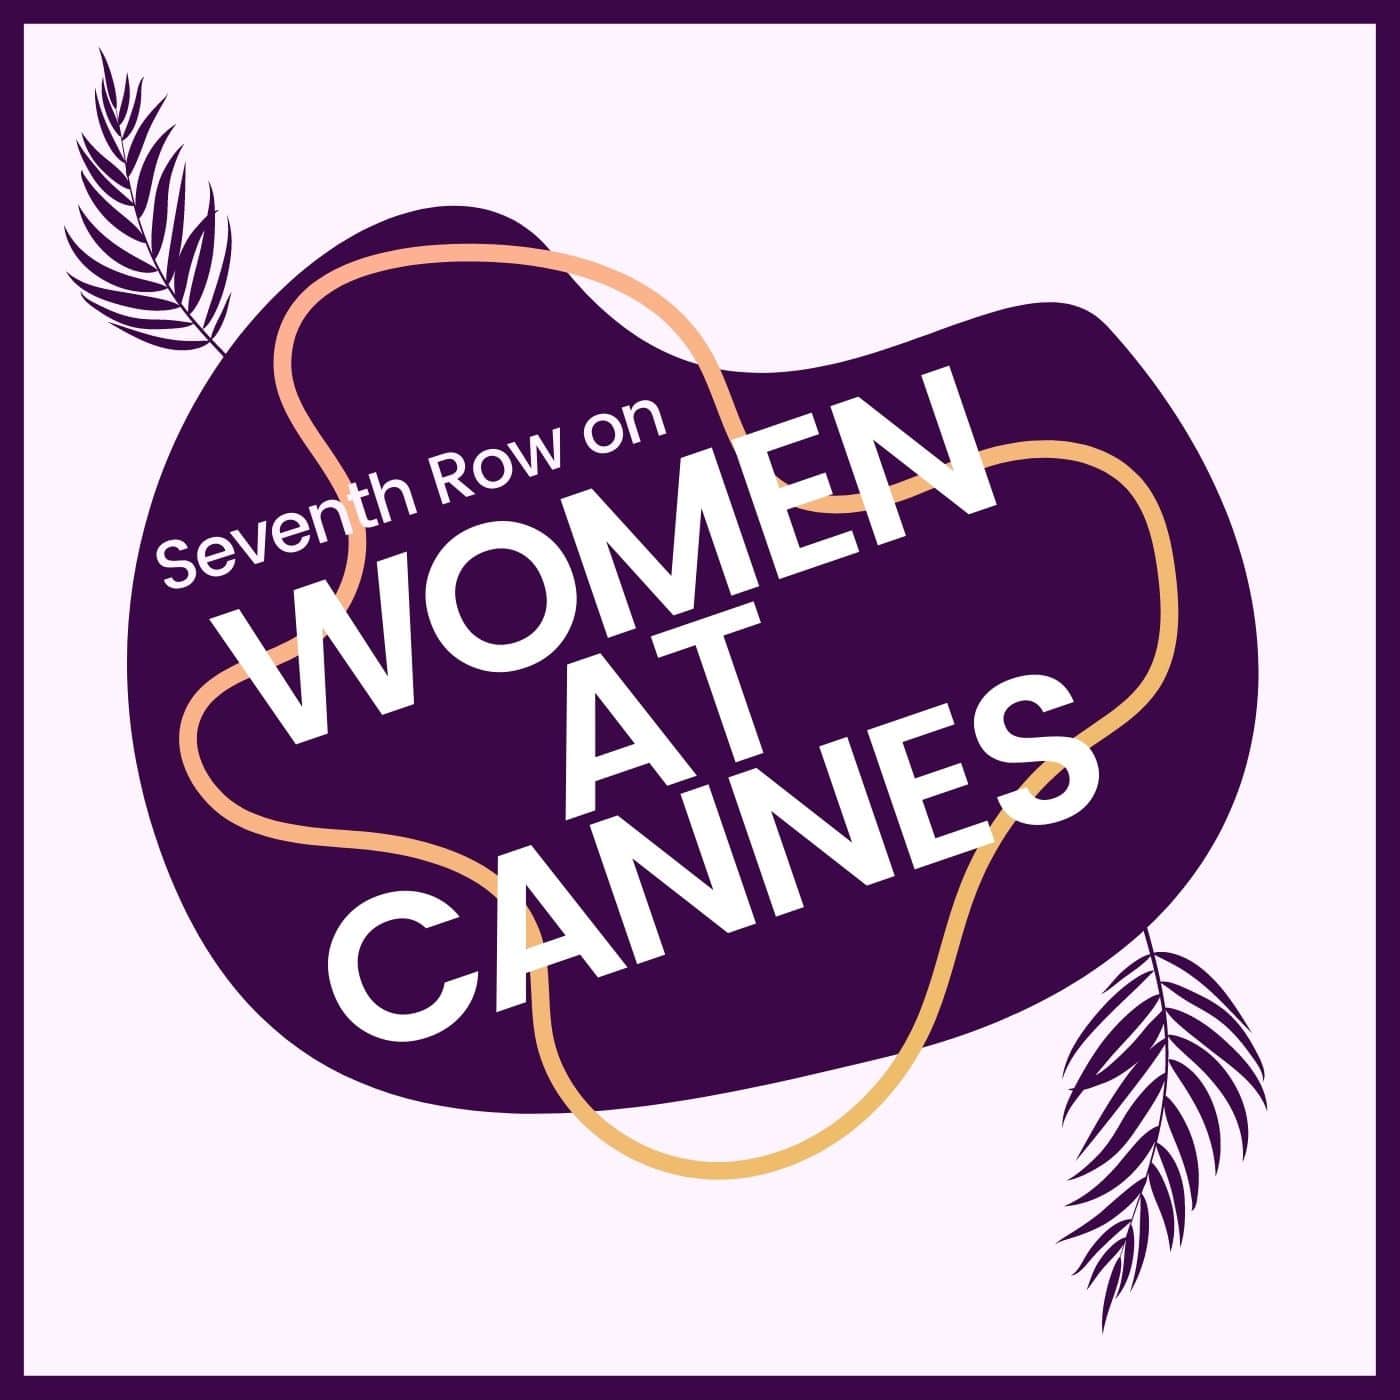 The Women at Cannes podcast seasons logo, a podcast season exploring Women directors at Cannes, like Falcon Lake, the first feature from Charlotte Lebon